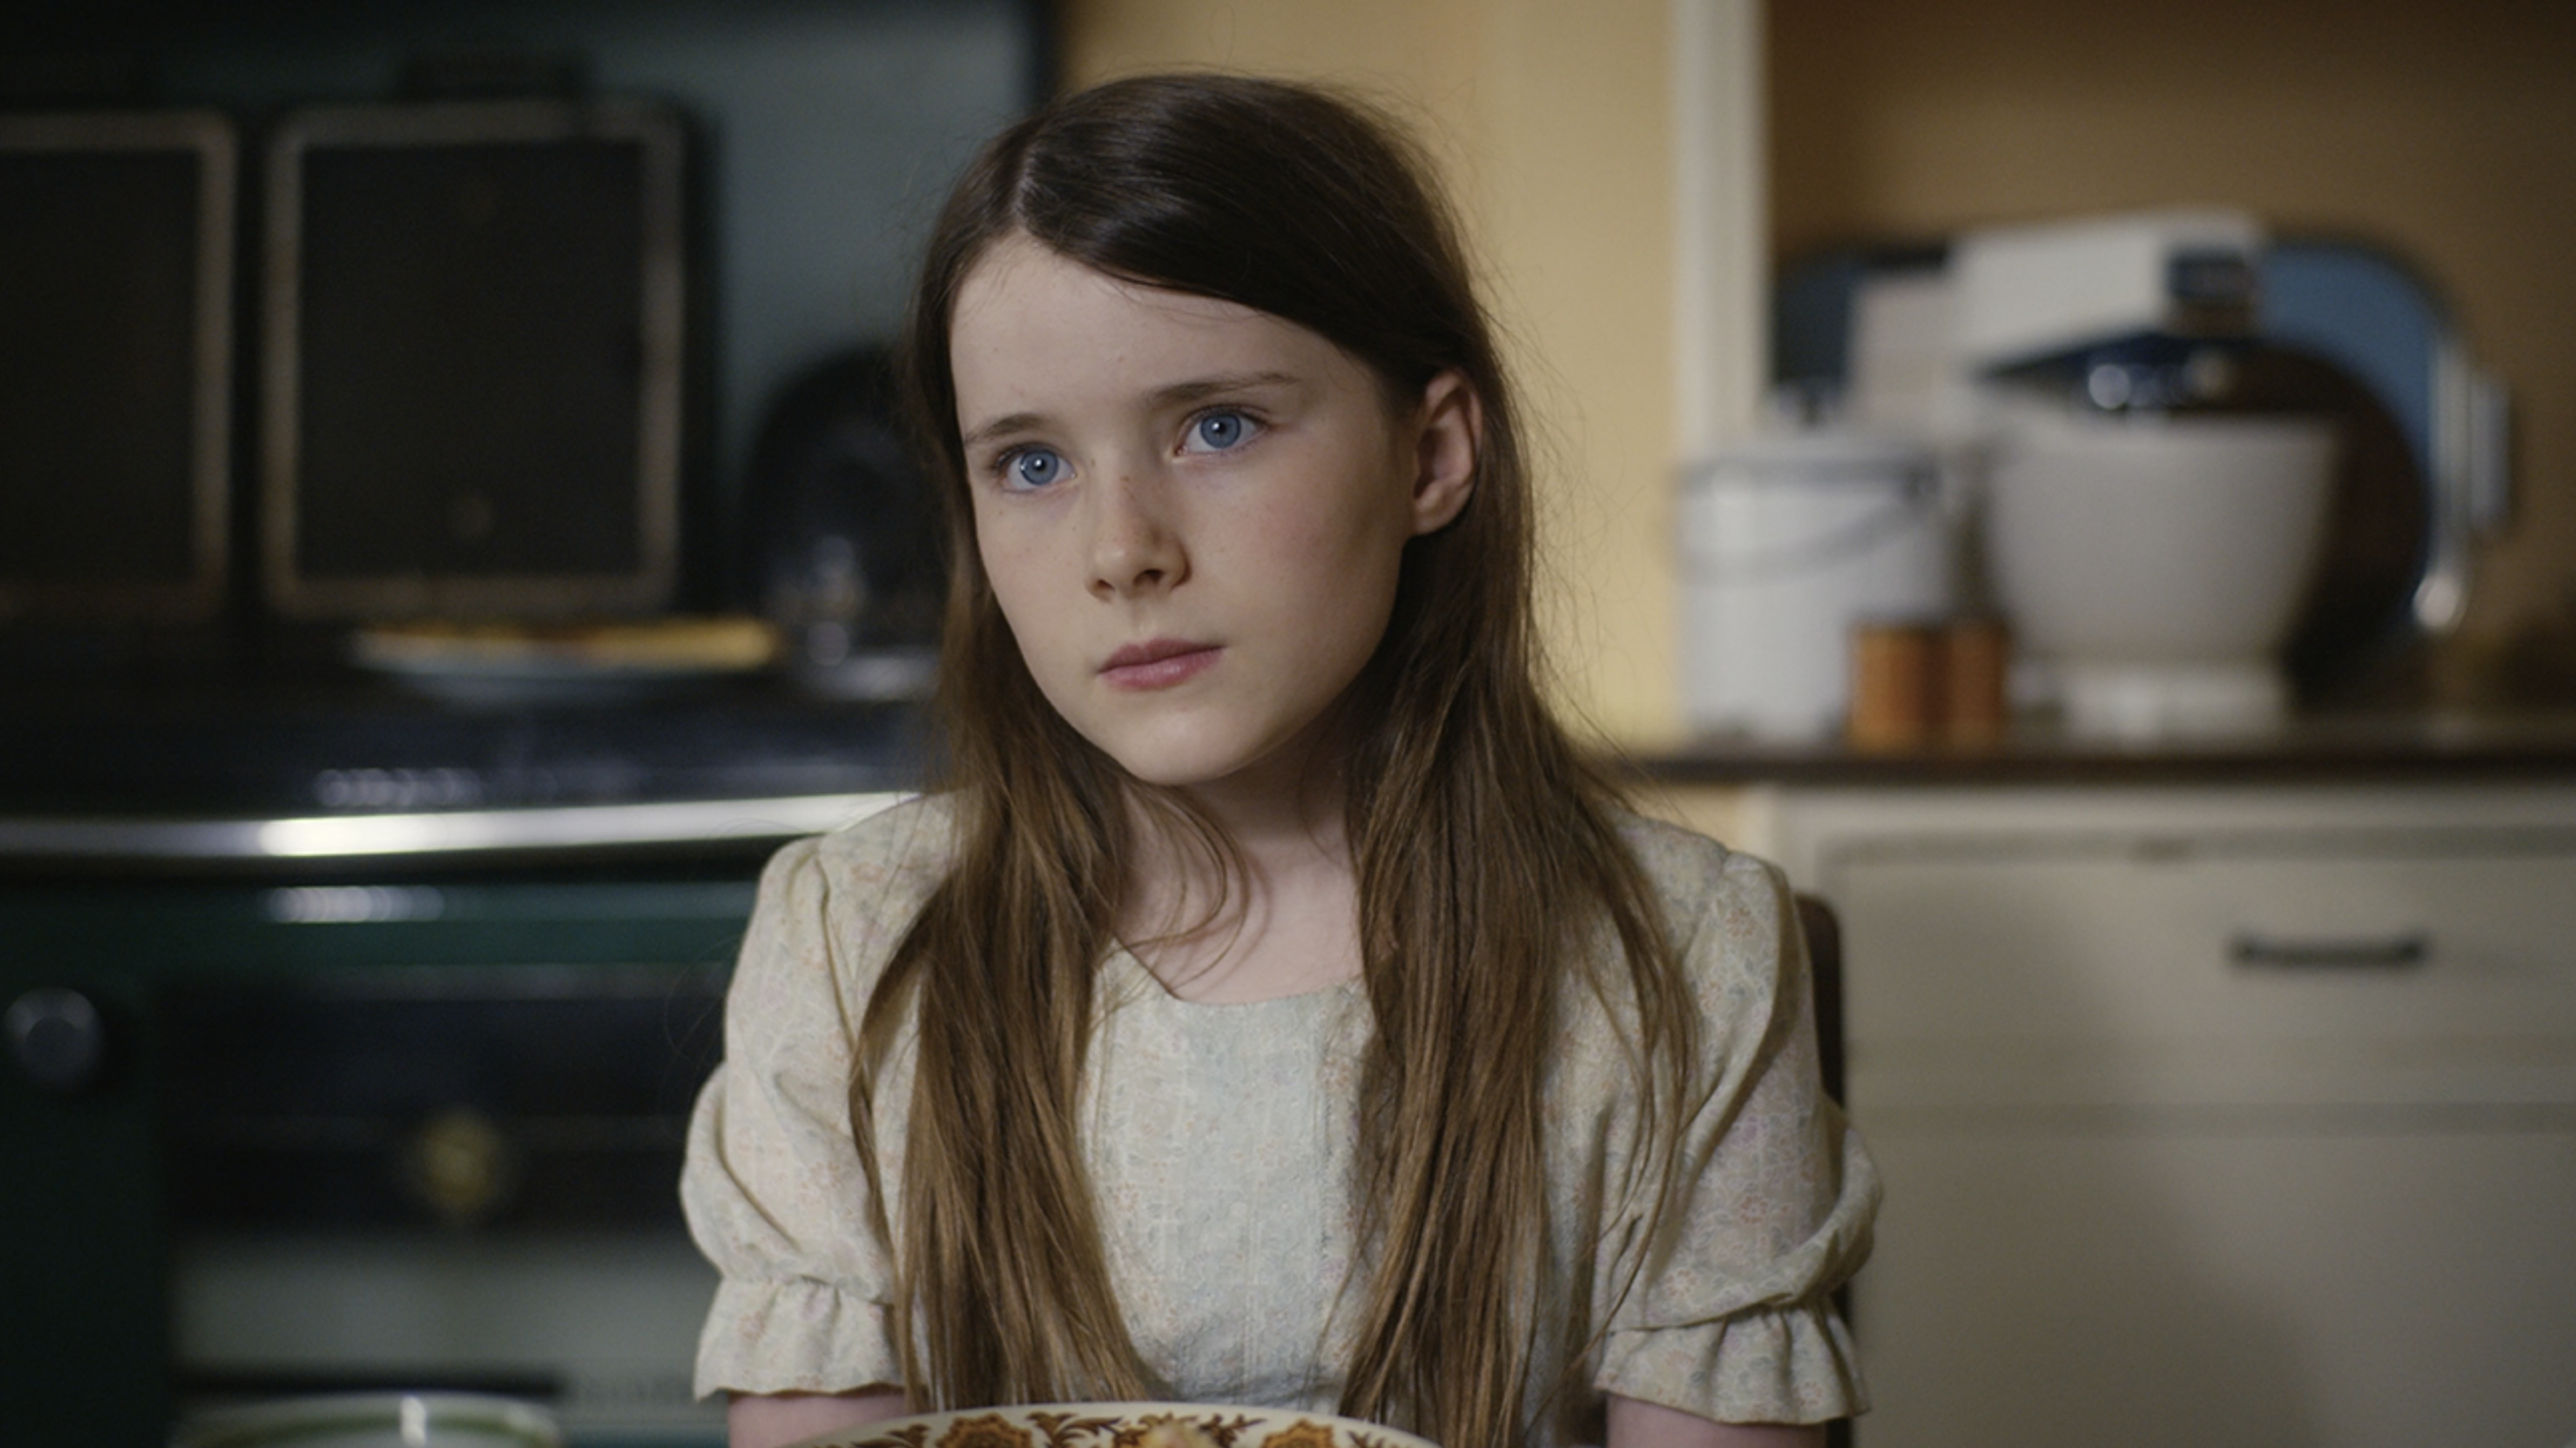 THE QUIET GIRL Trailer: A Young Girl Adjusts To a New Life in Ireland’s Oscar Entry